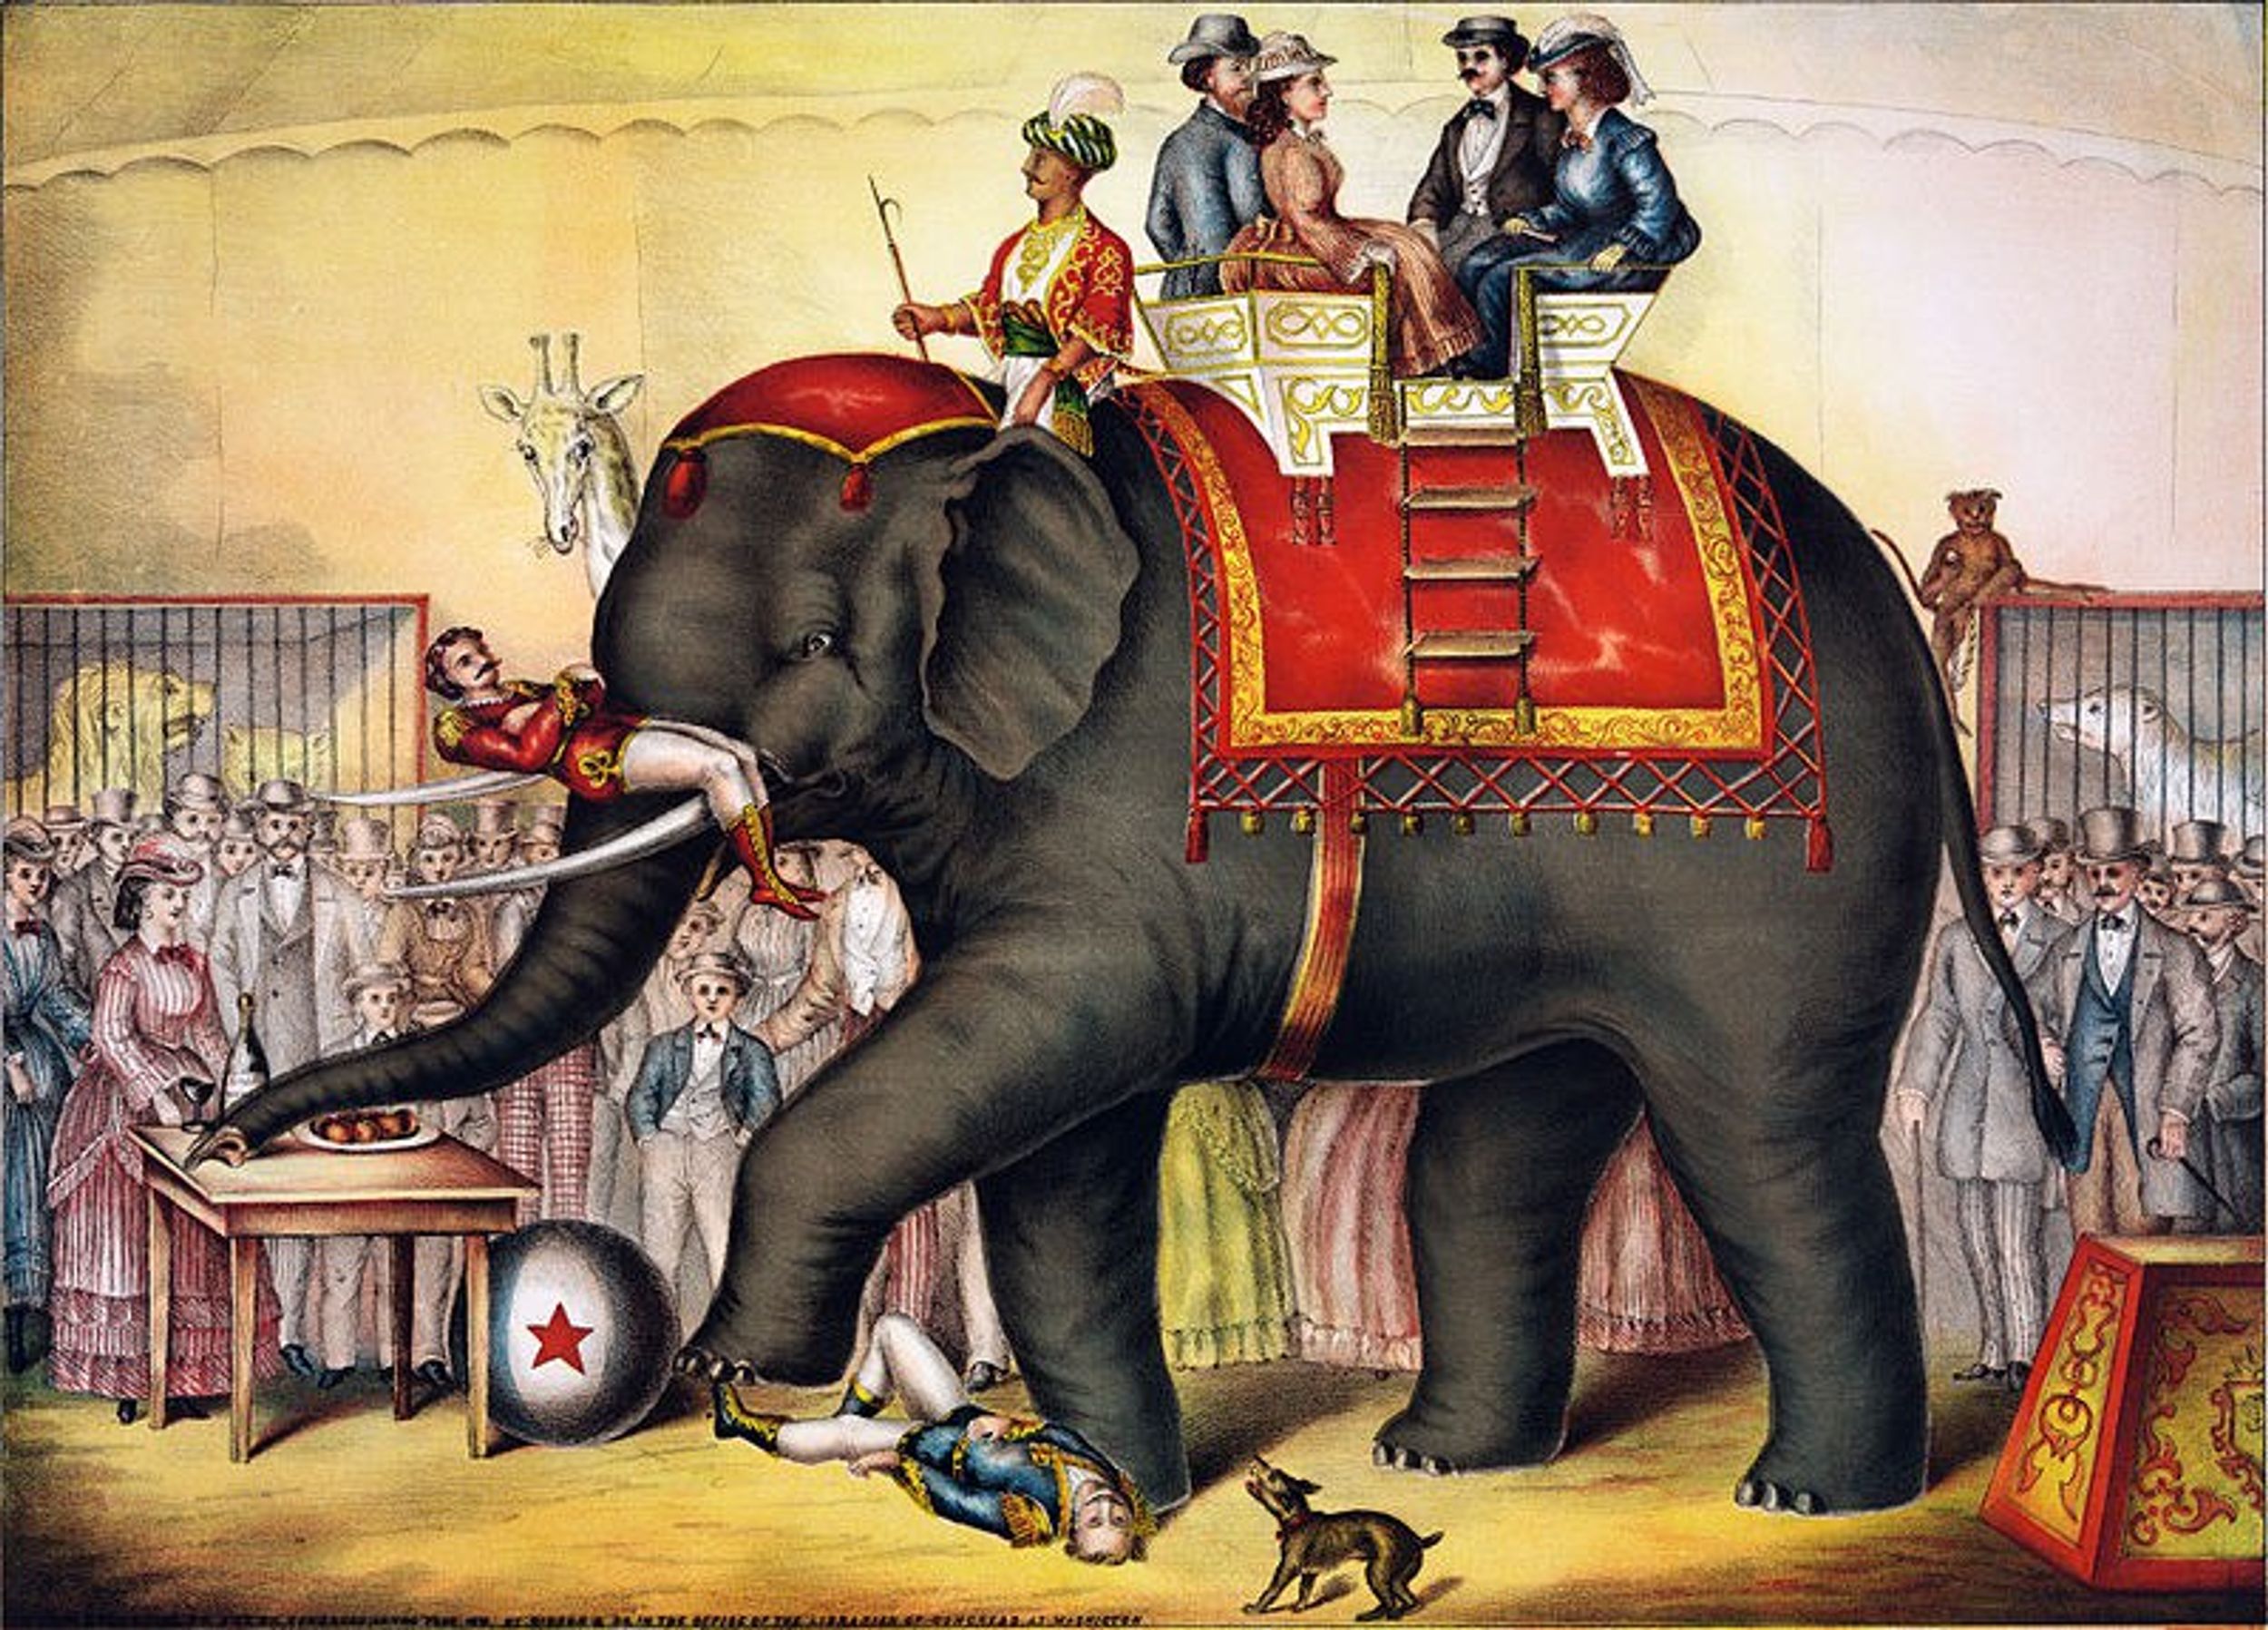 A Dark And Fast History Of Elephants In The Circus